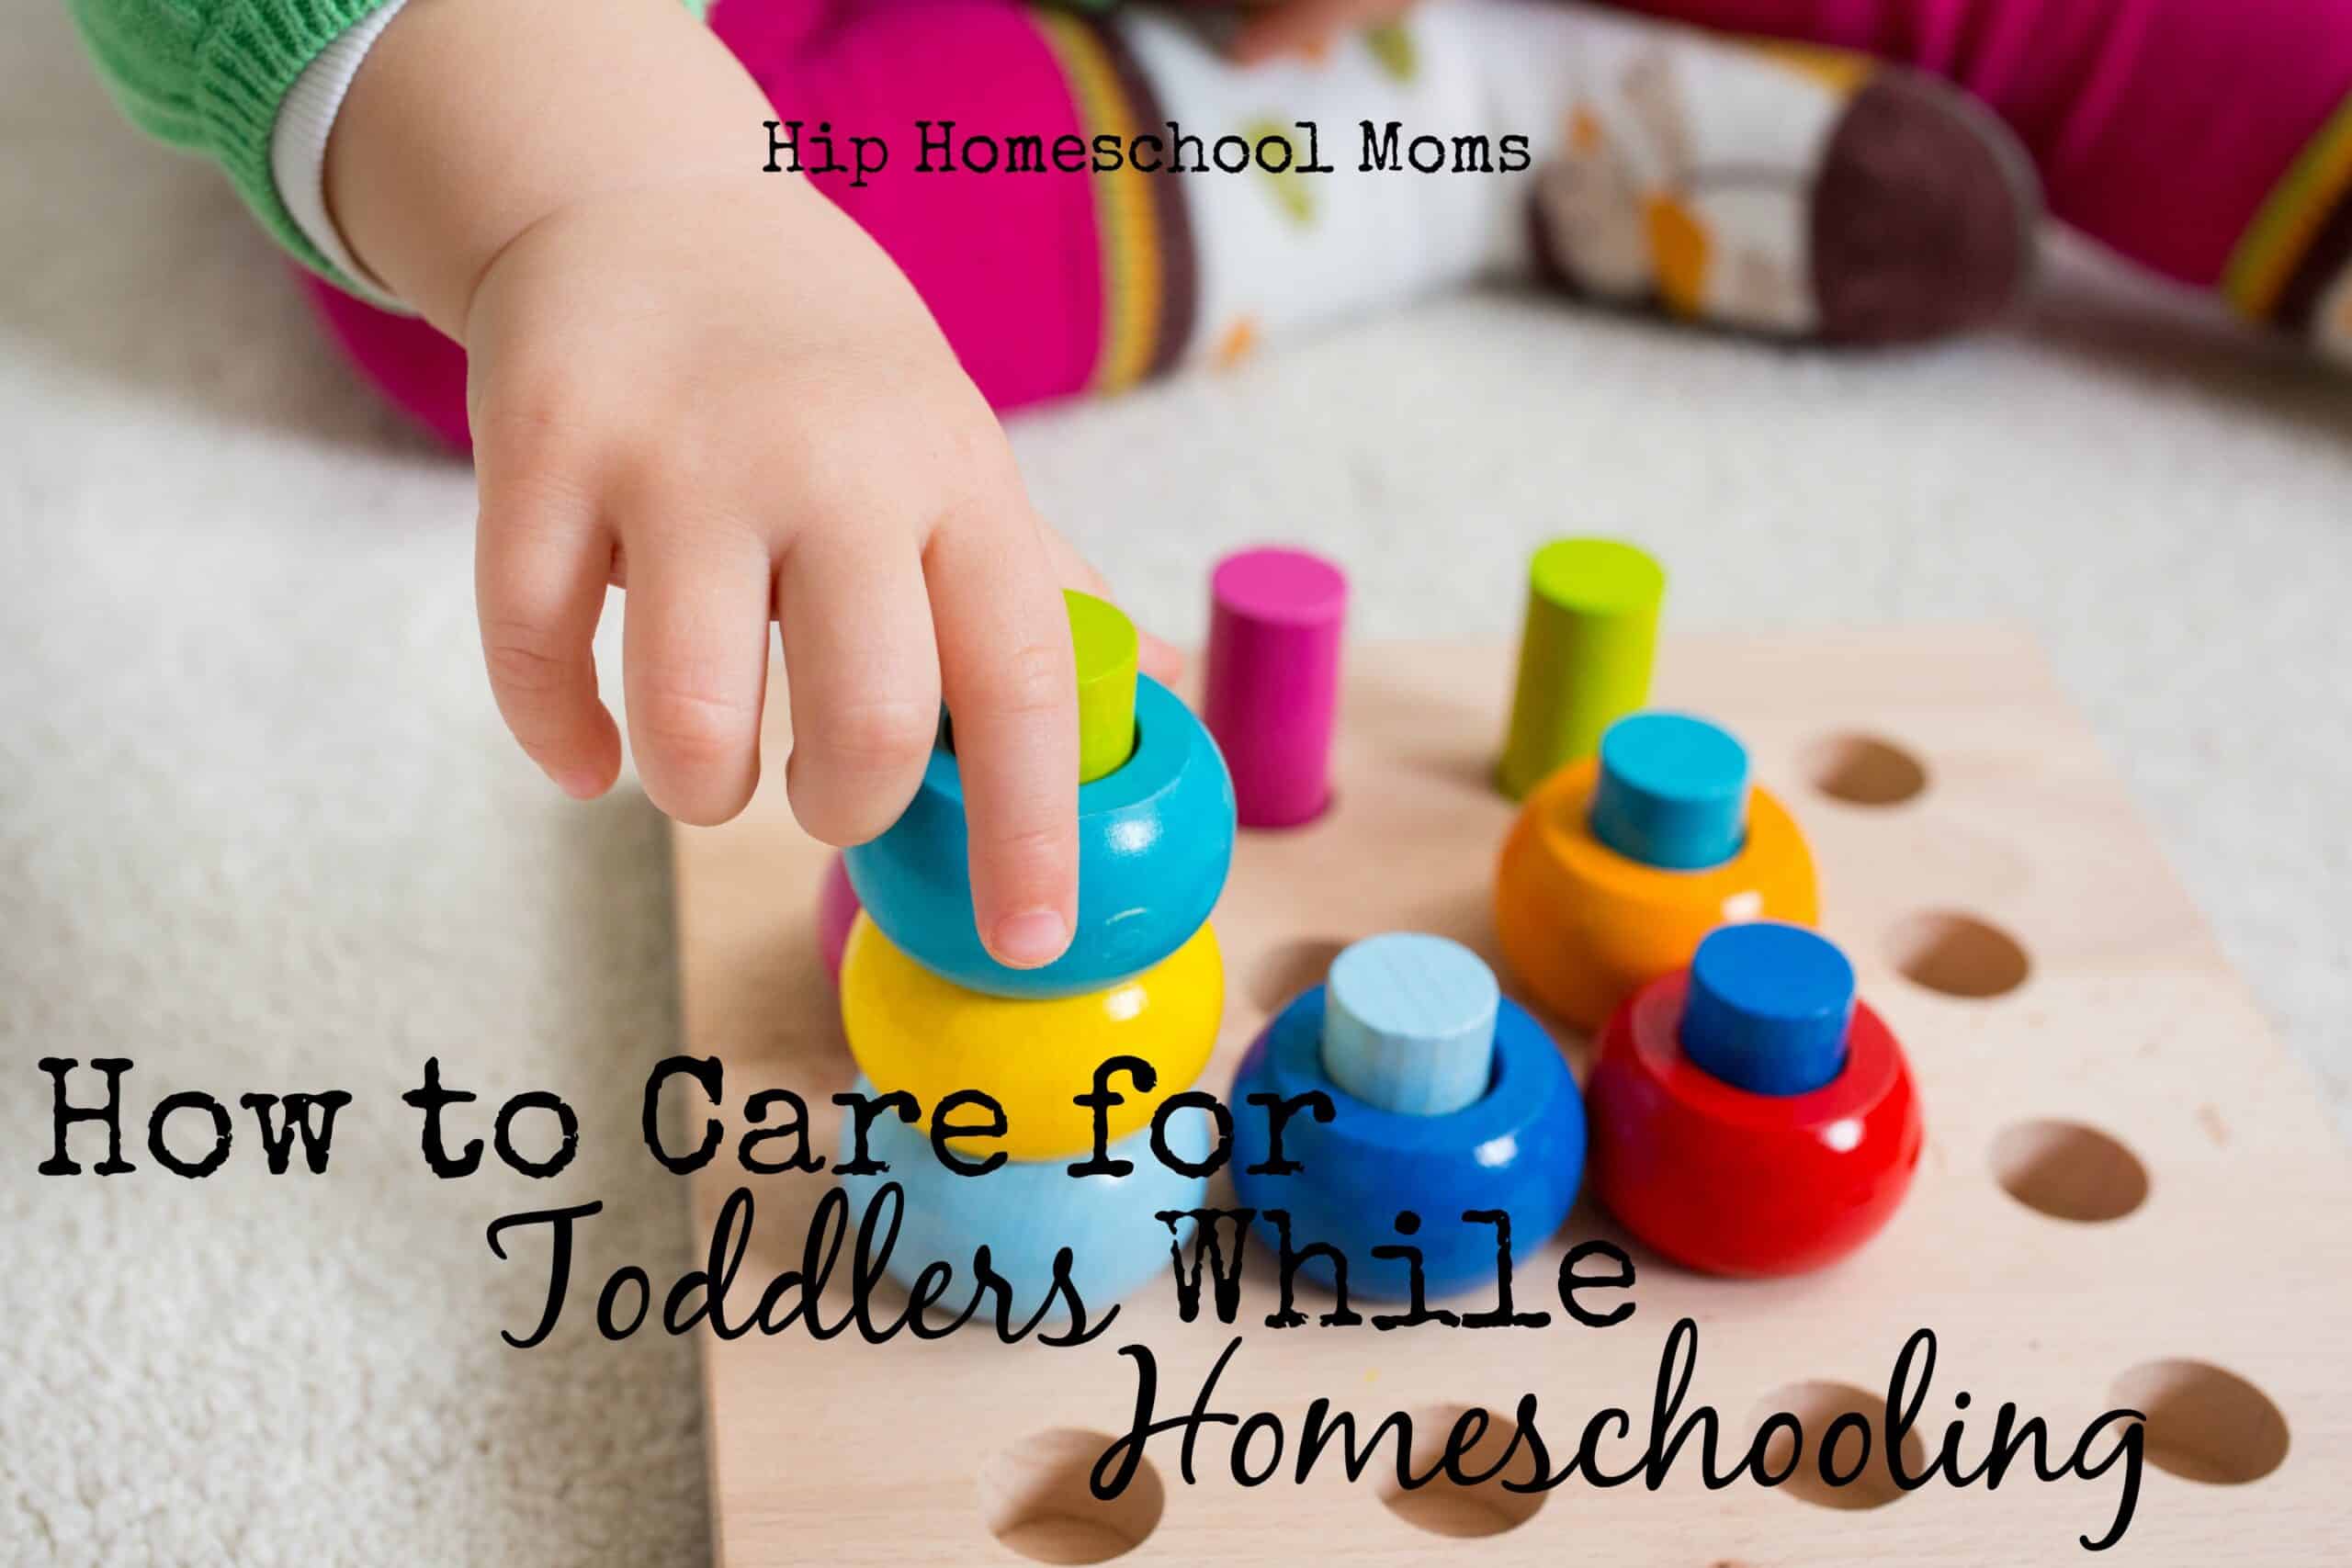 How to Care for Toddlers While Homeschooling